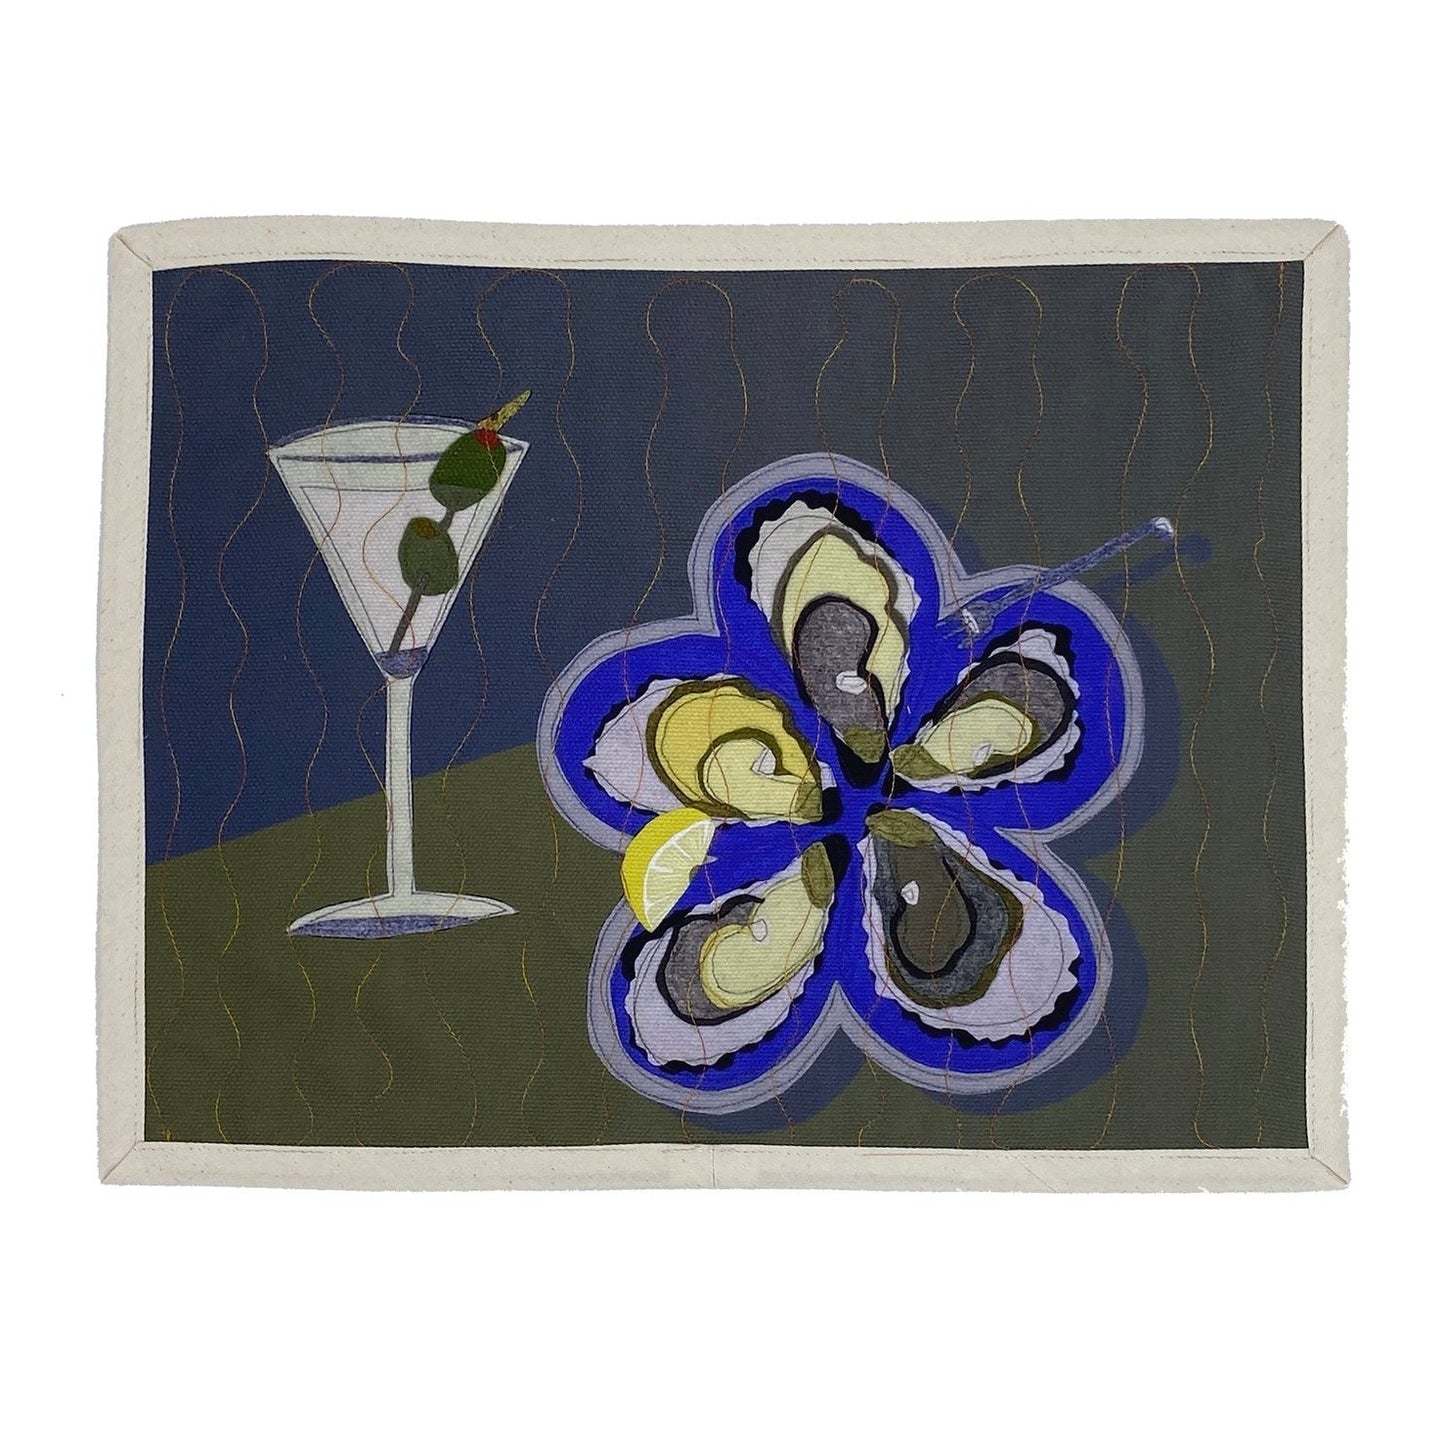 Martini and oysters placemat by Quirky Digs -- printed and topstitched poly canvas placemat 